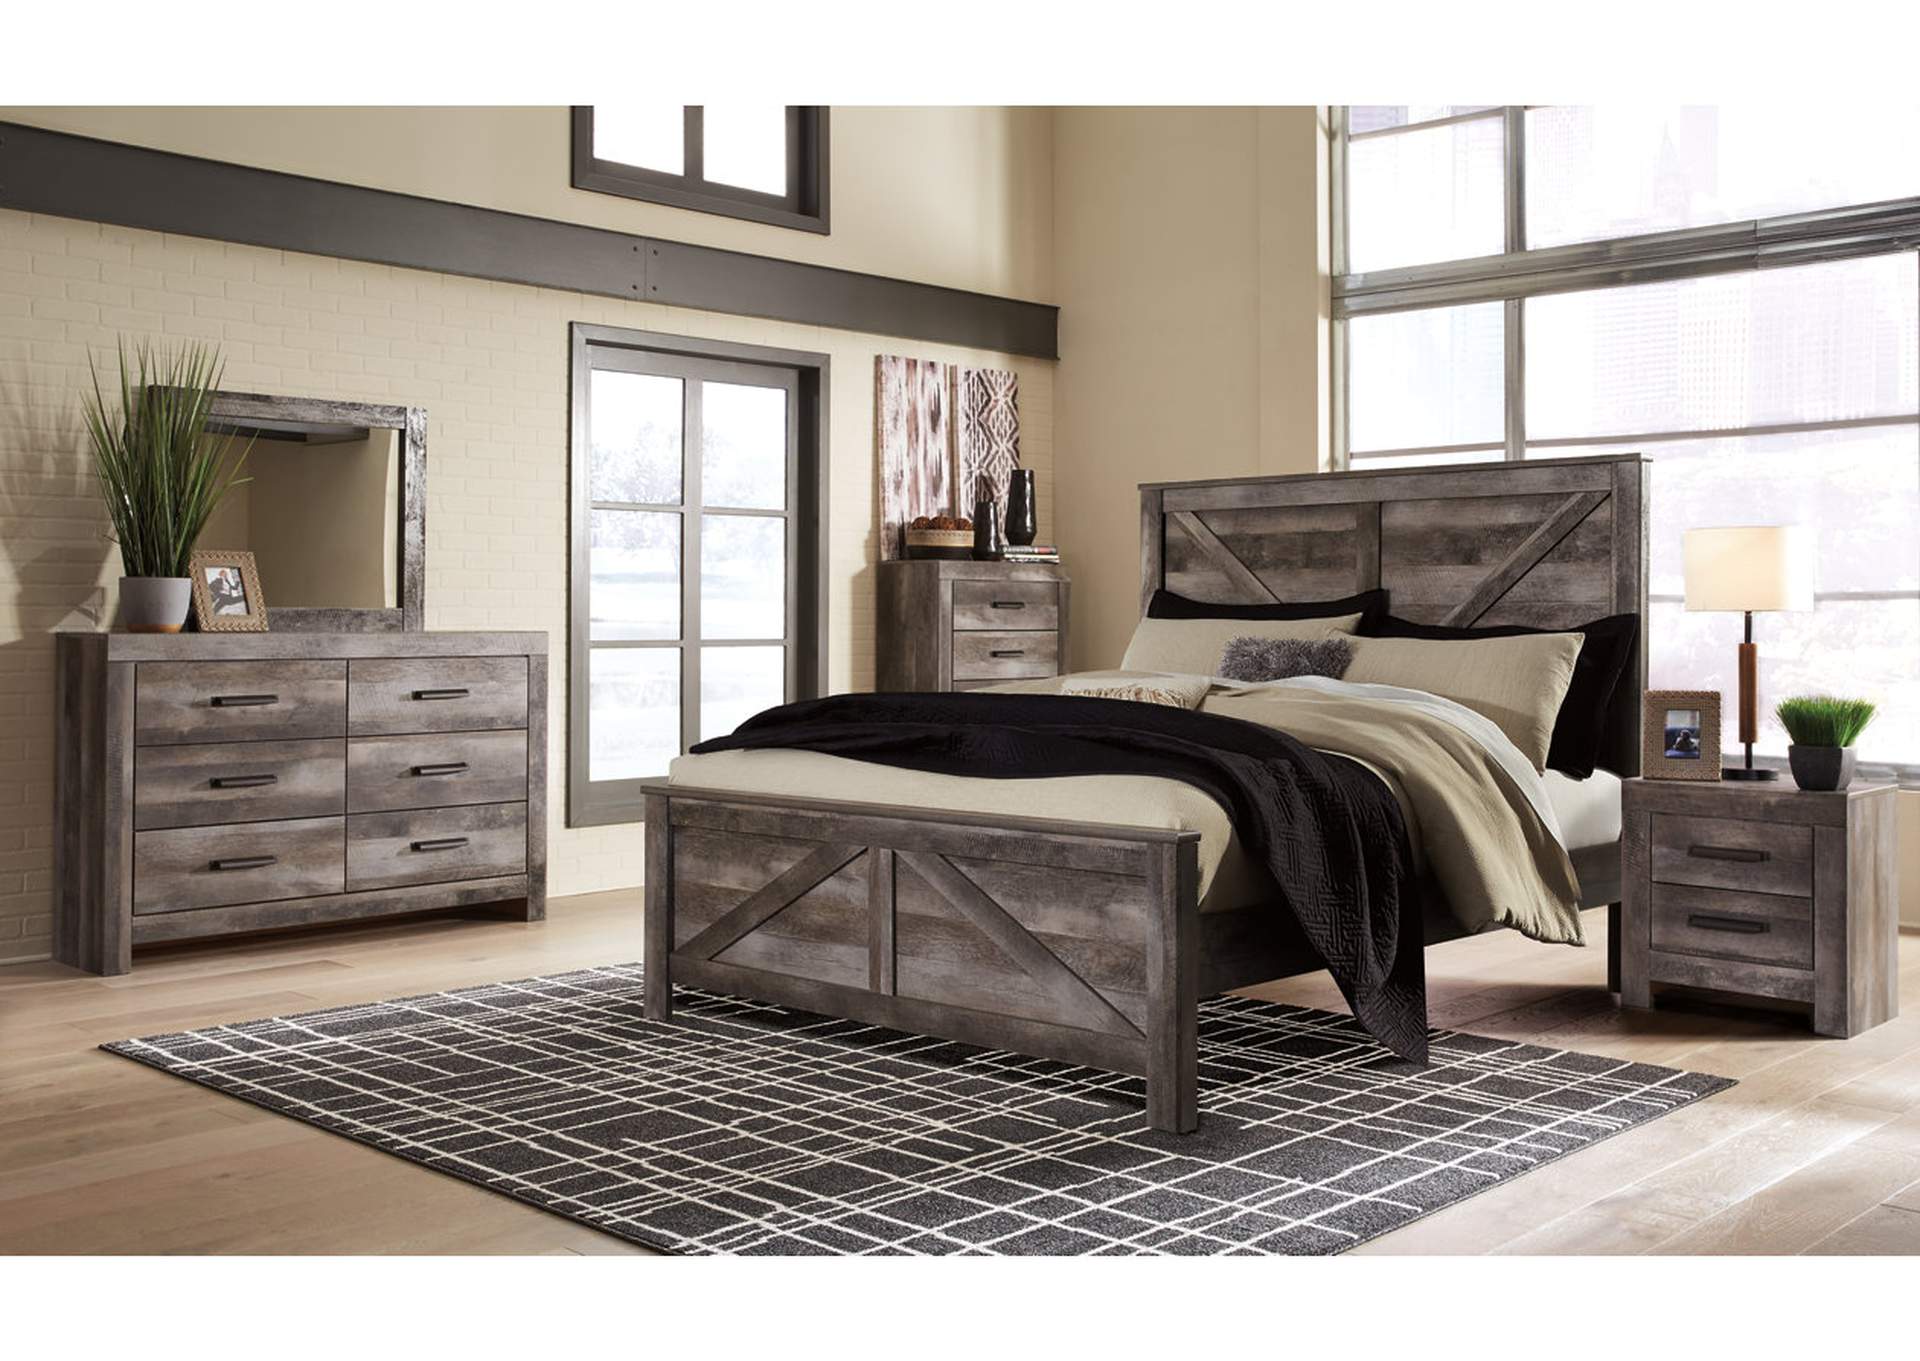 The Best Furniture Store in El Paso For Bedroom Furniture